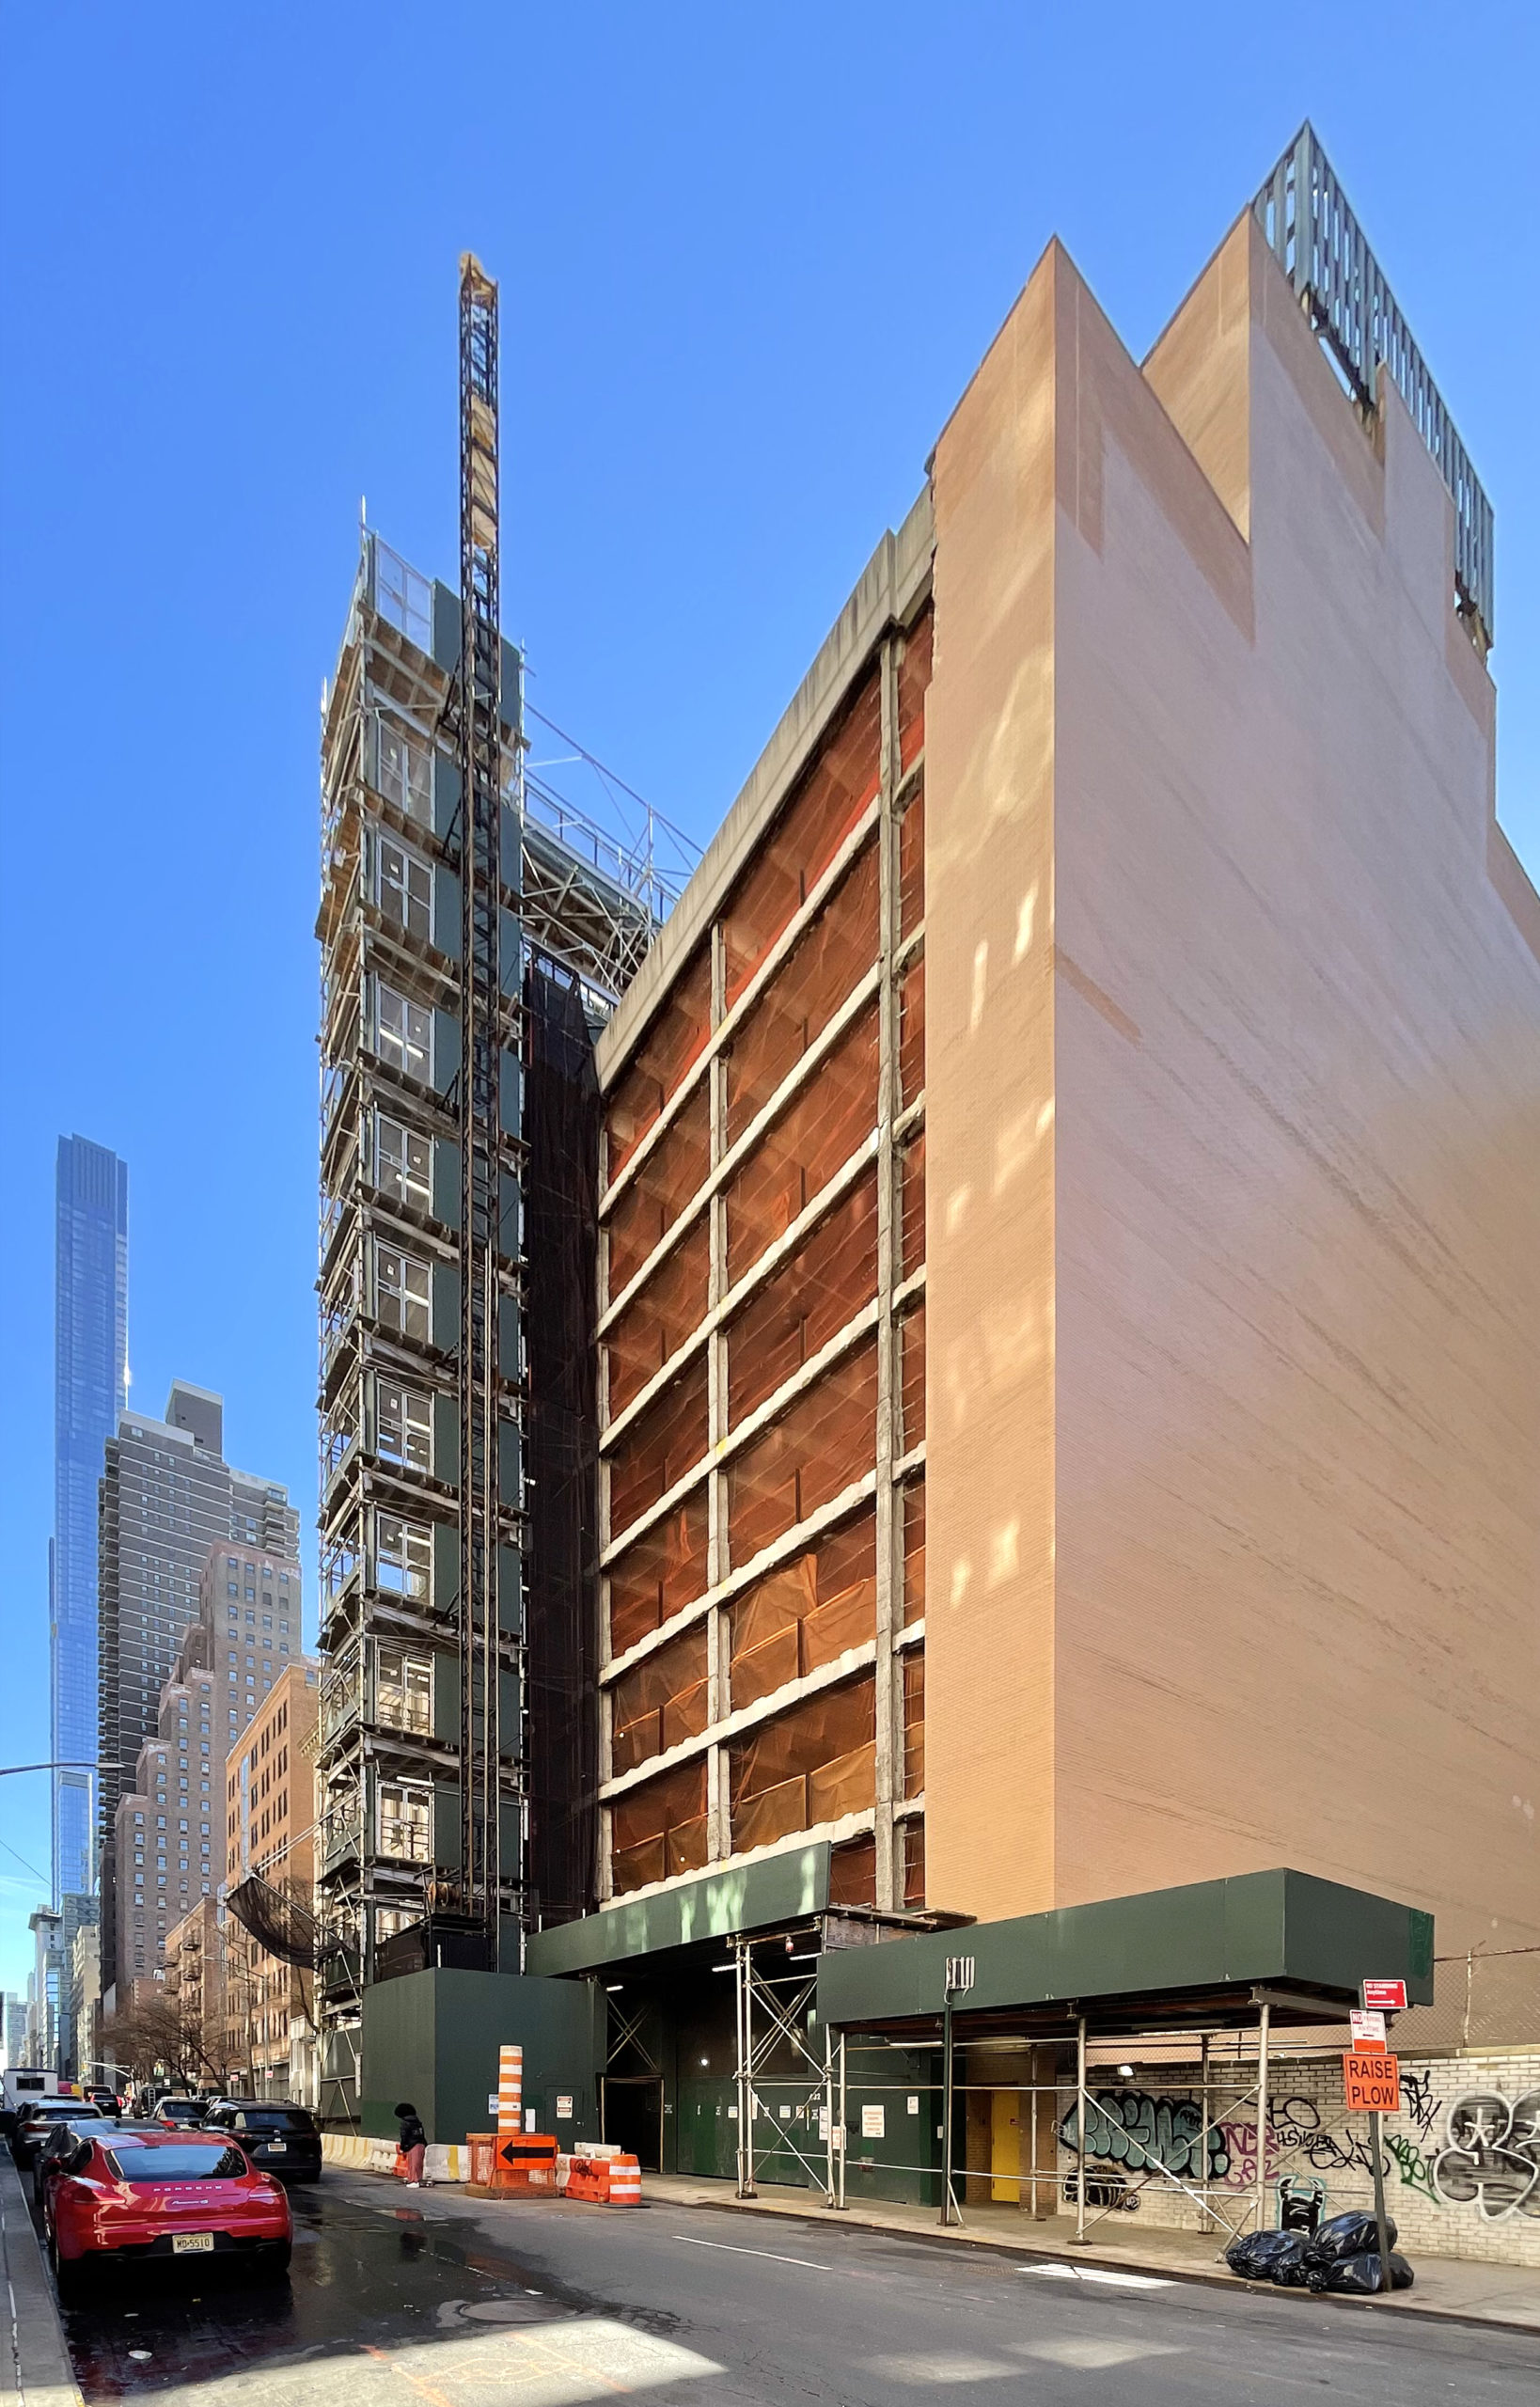 Renovation Continues for Mount Sinai Surgical Innovation Center at 432 West 58th Street in Hell’s Kitchen, Manhattan